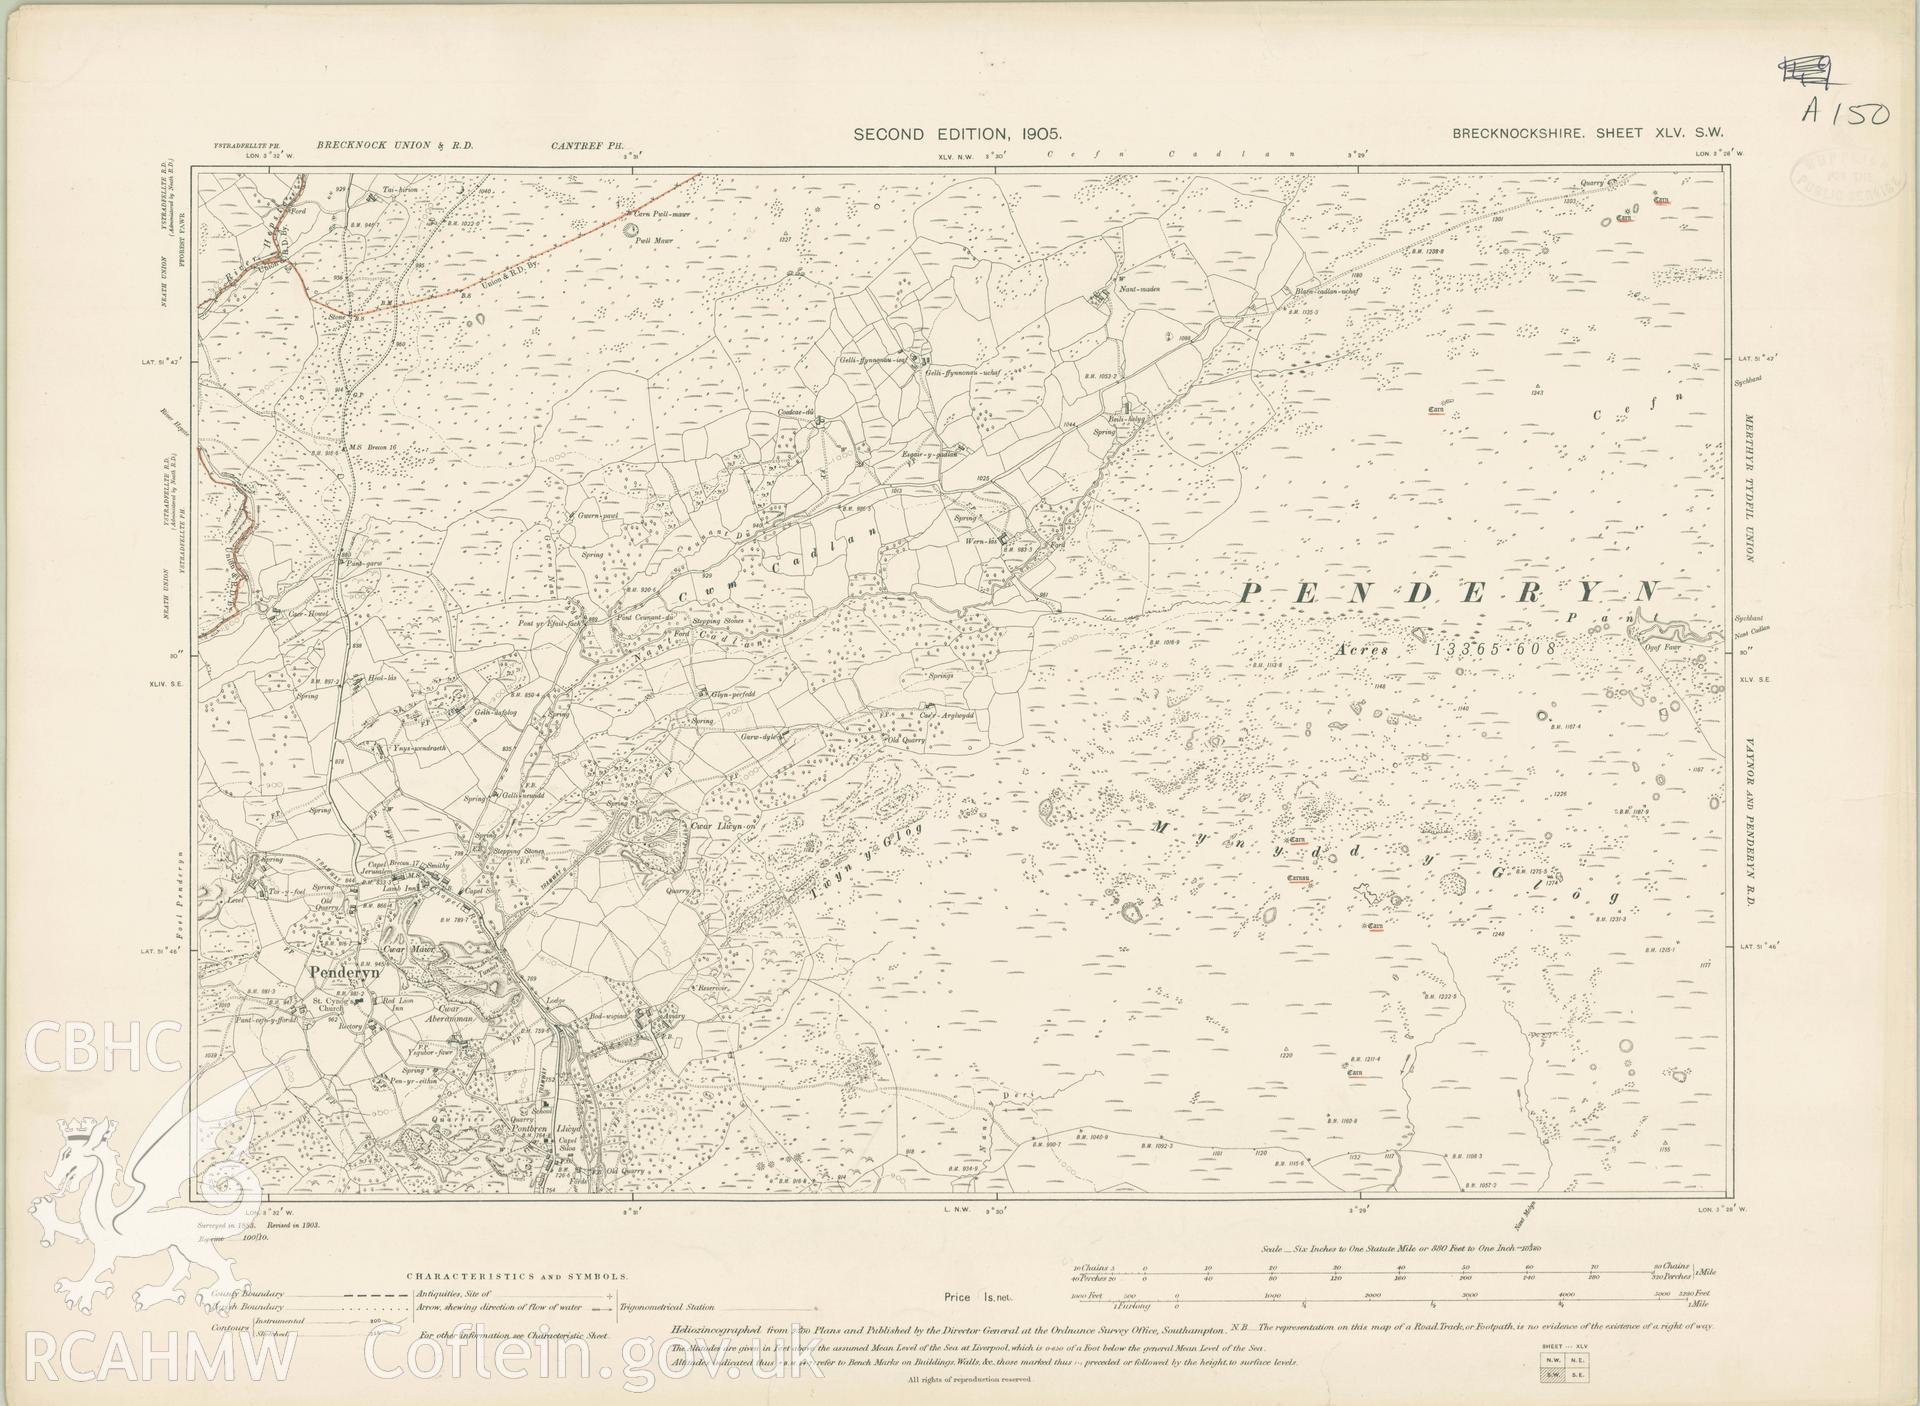 Digital copy of a Second Edition 1905 Ordnance Survey map covering the area around Penderyn.